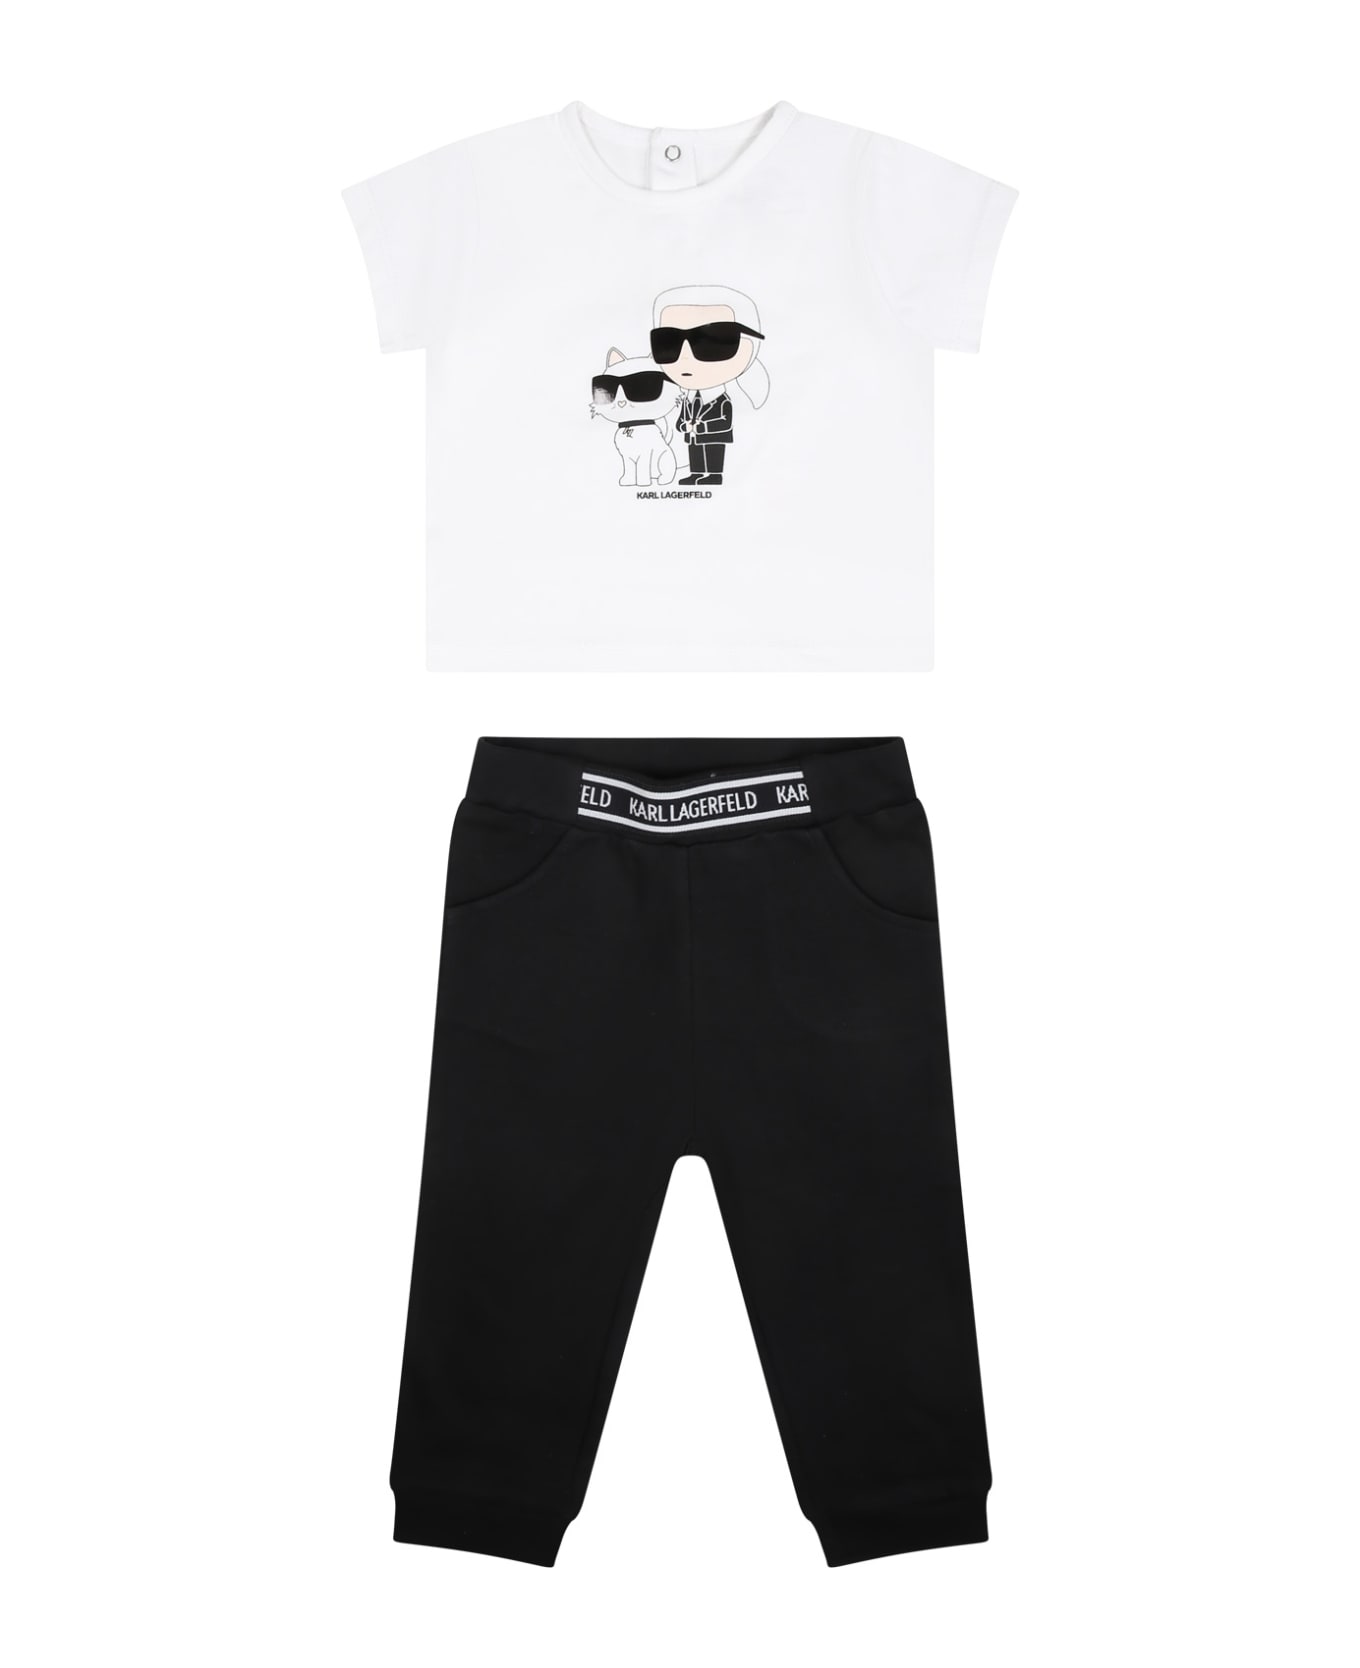 Karl Lagerfeld Kids Multicolor Set For Baby Girl With Logo - Multicolor